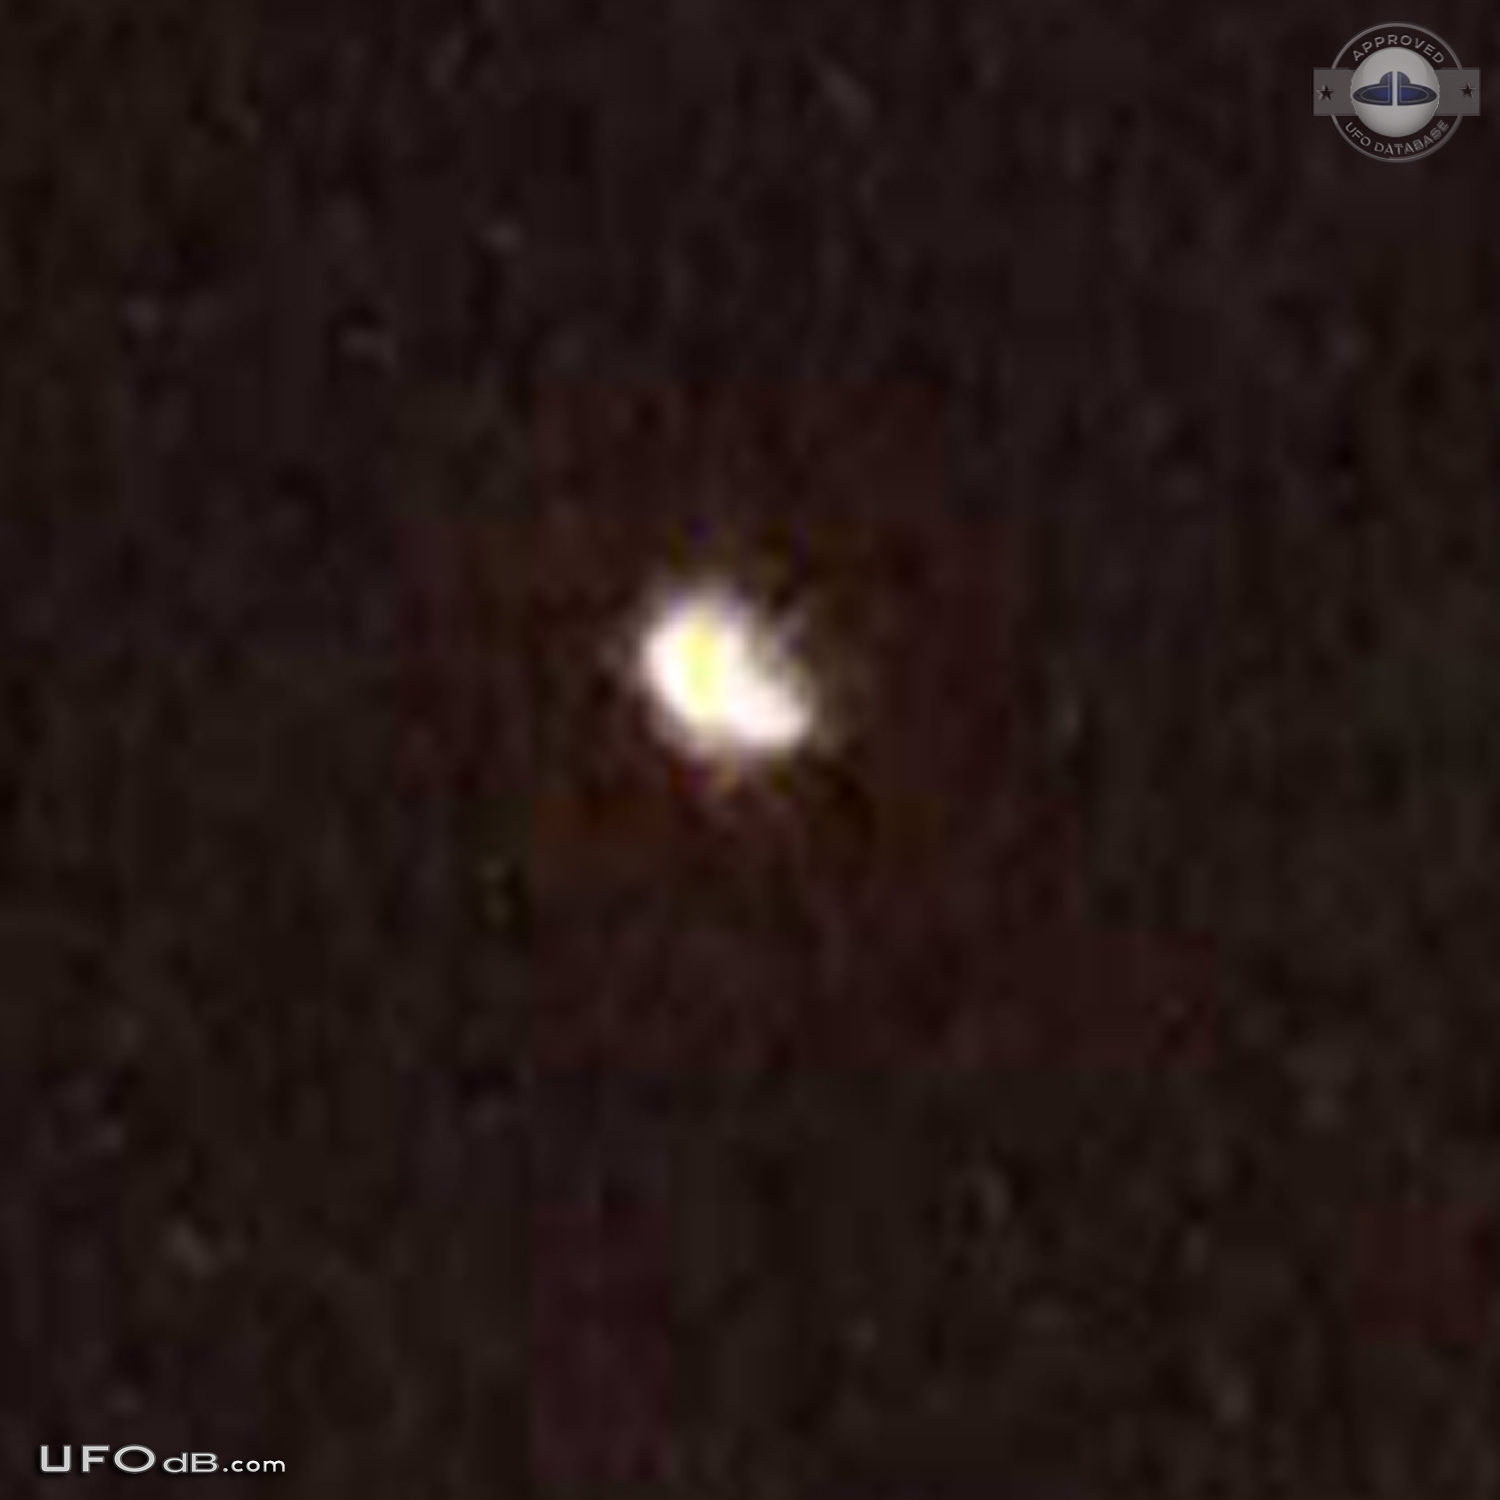 Sphere UFOs appear beside Fireworks during Diwali in New Delhi - 2011 UFO Picture #475-3